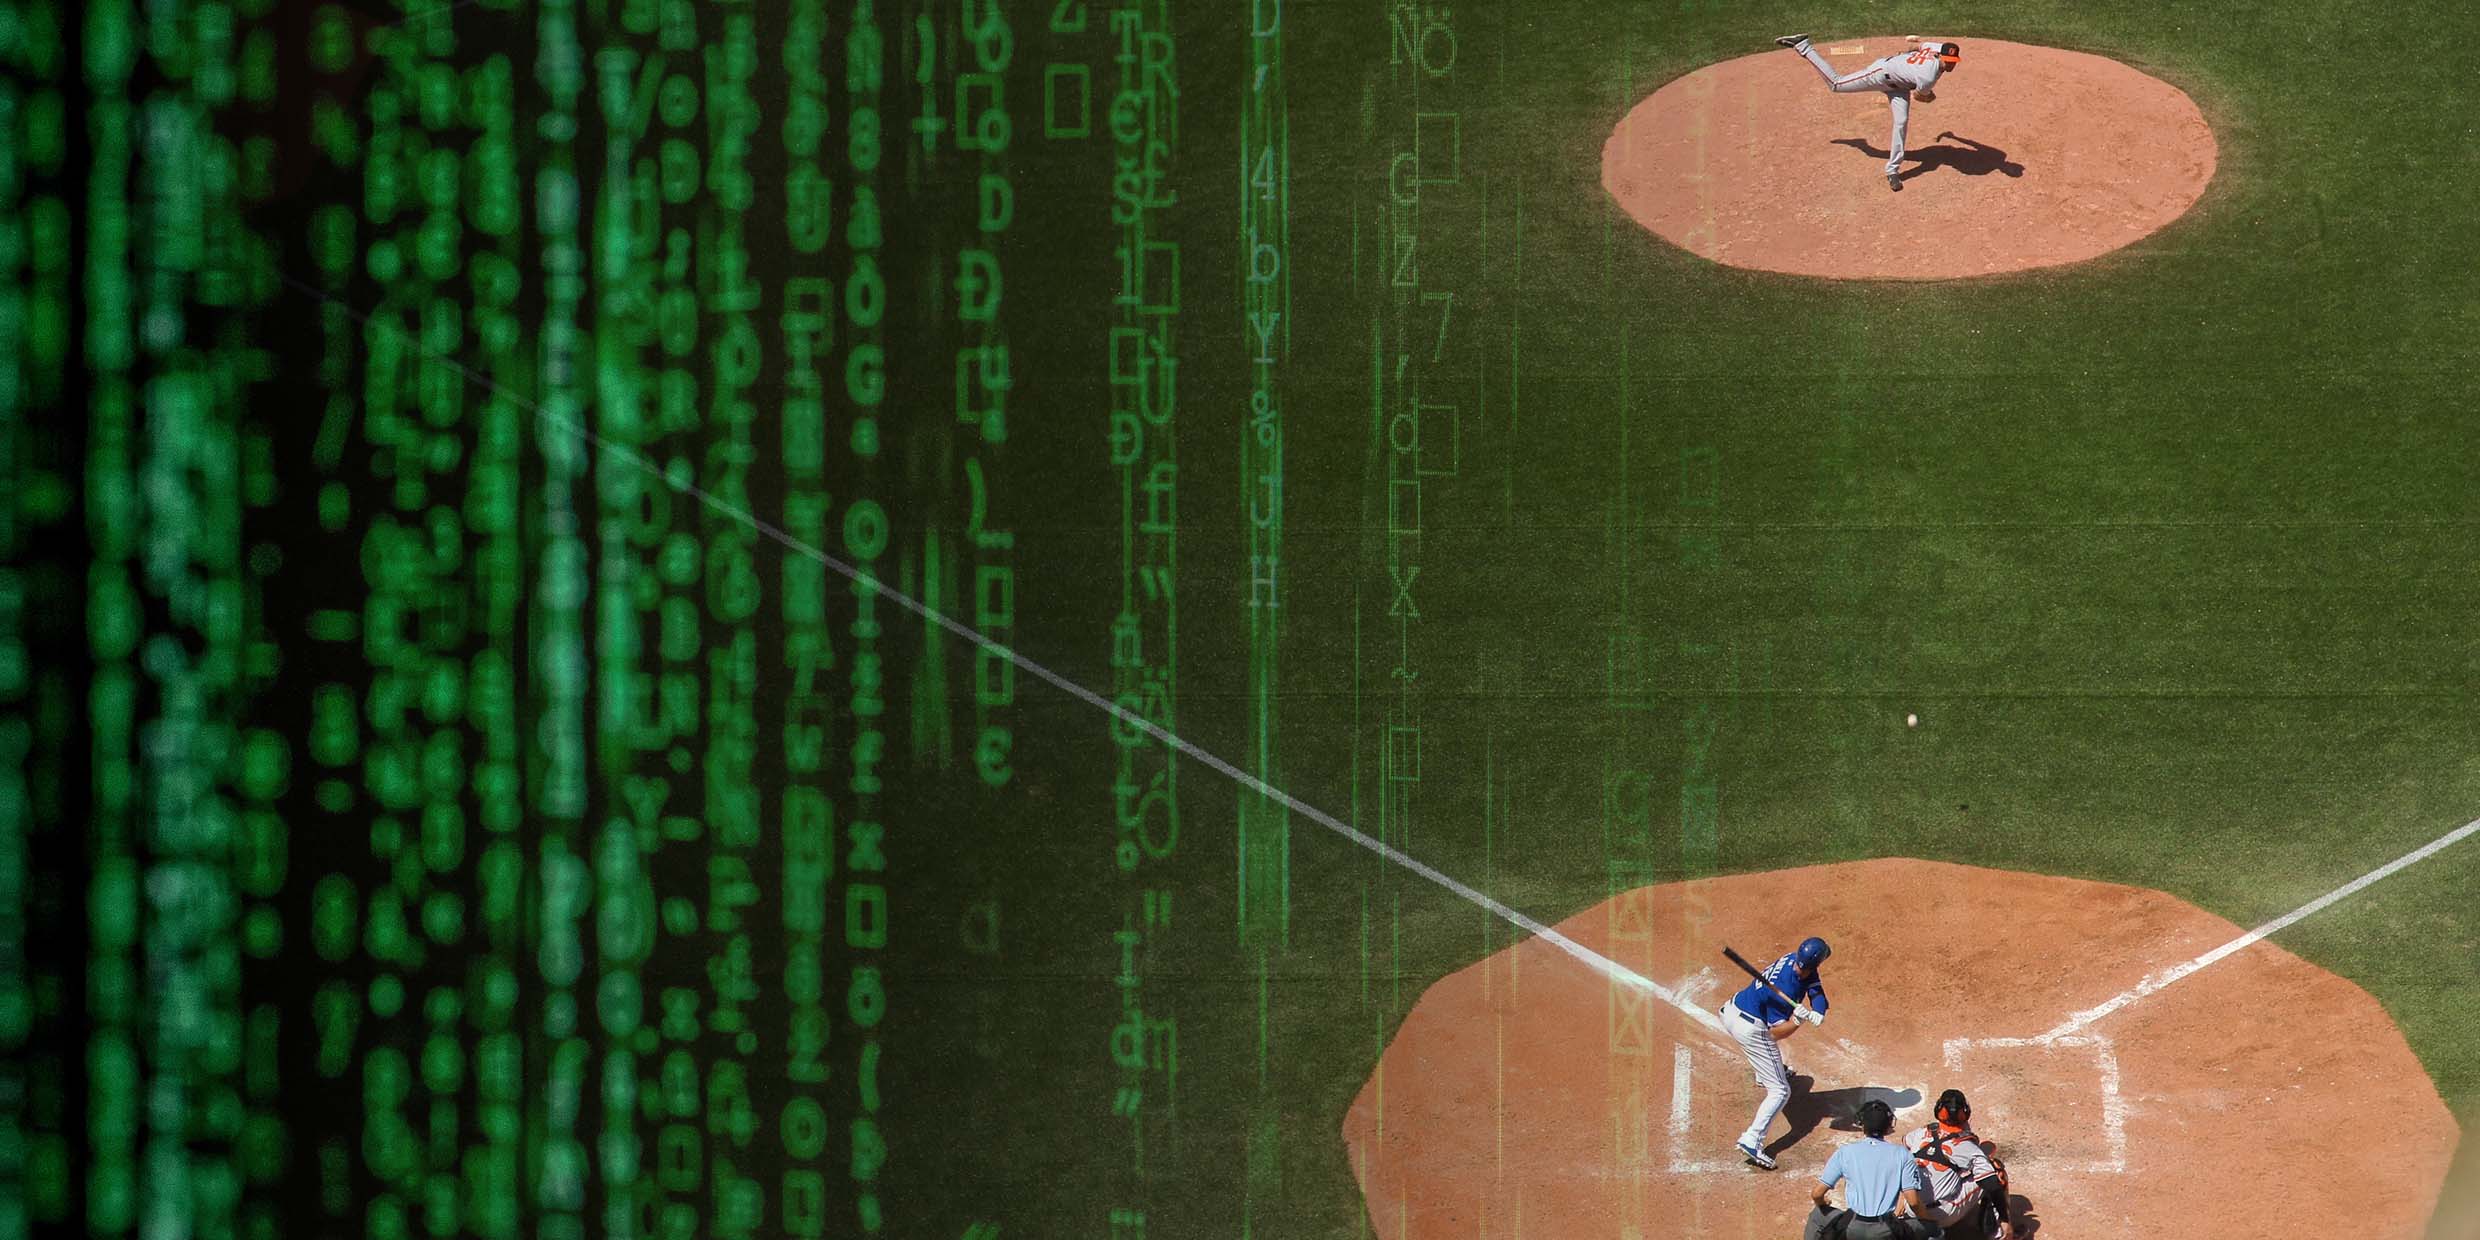 Image of baseball game with computer code superimposed